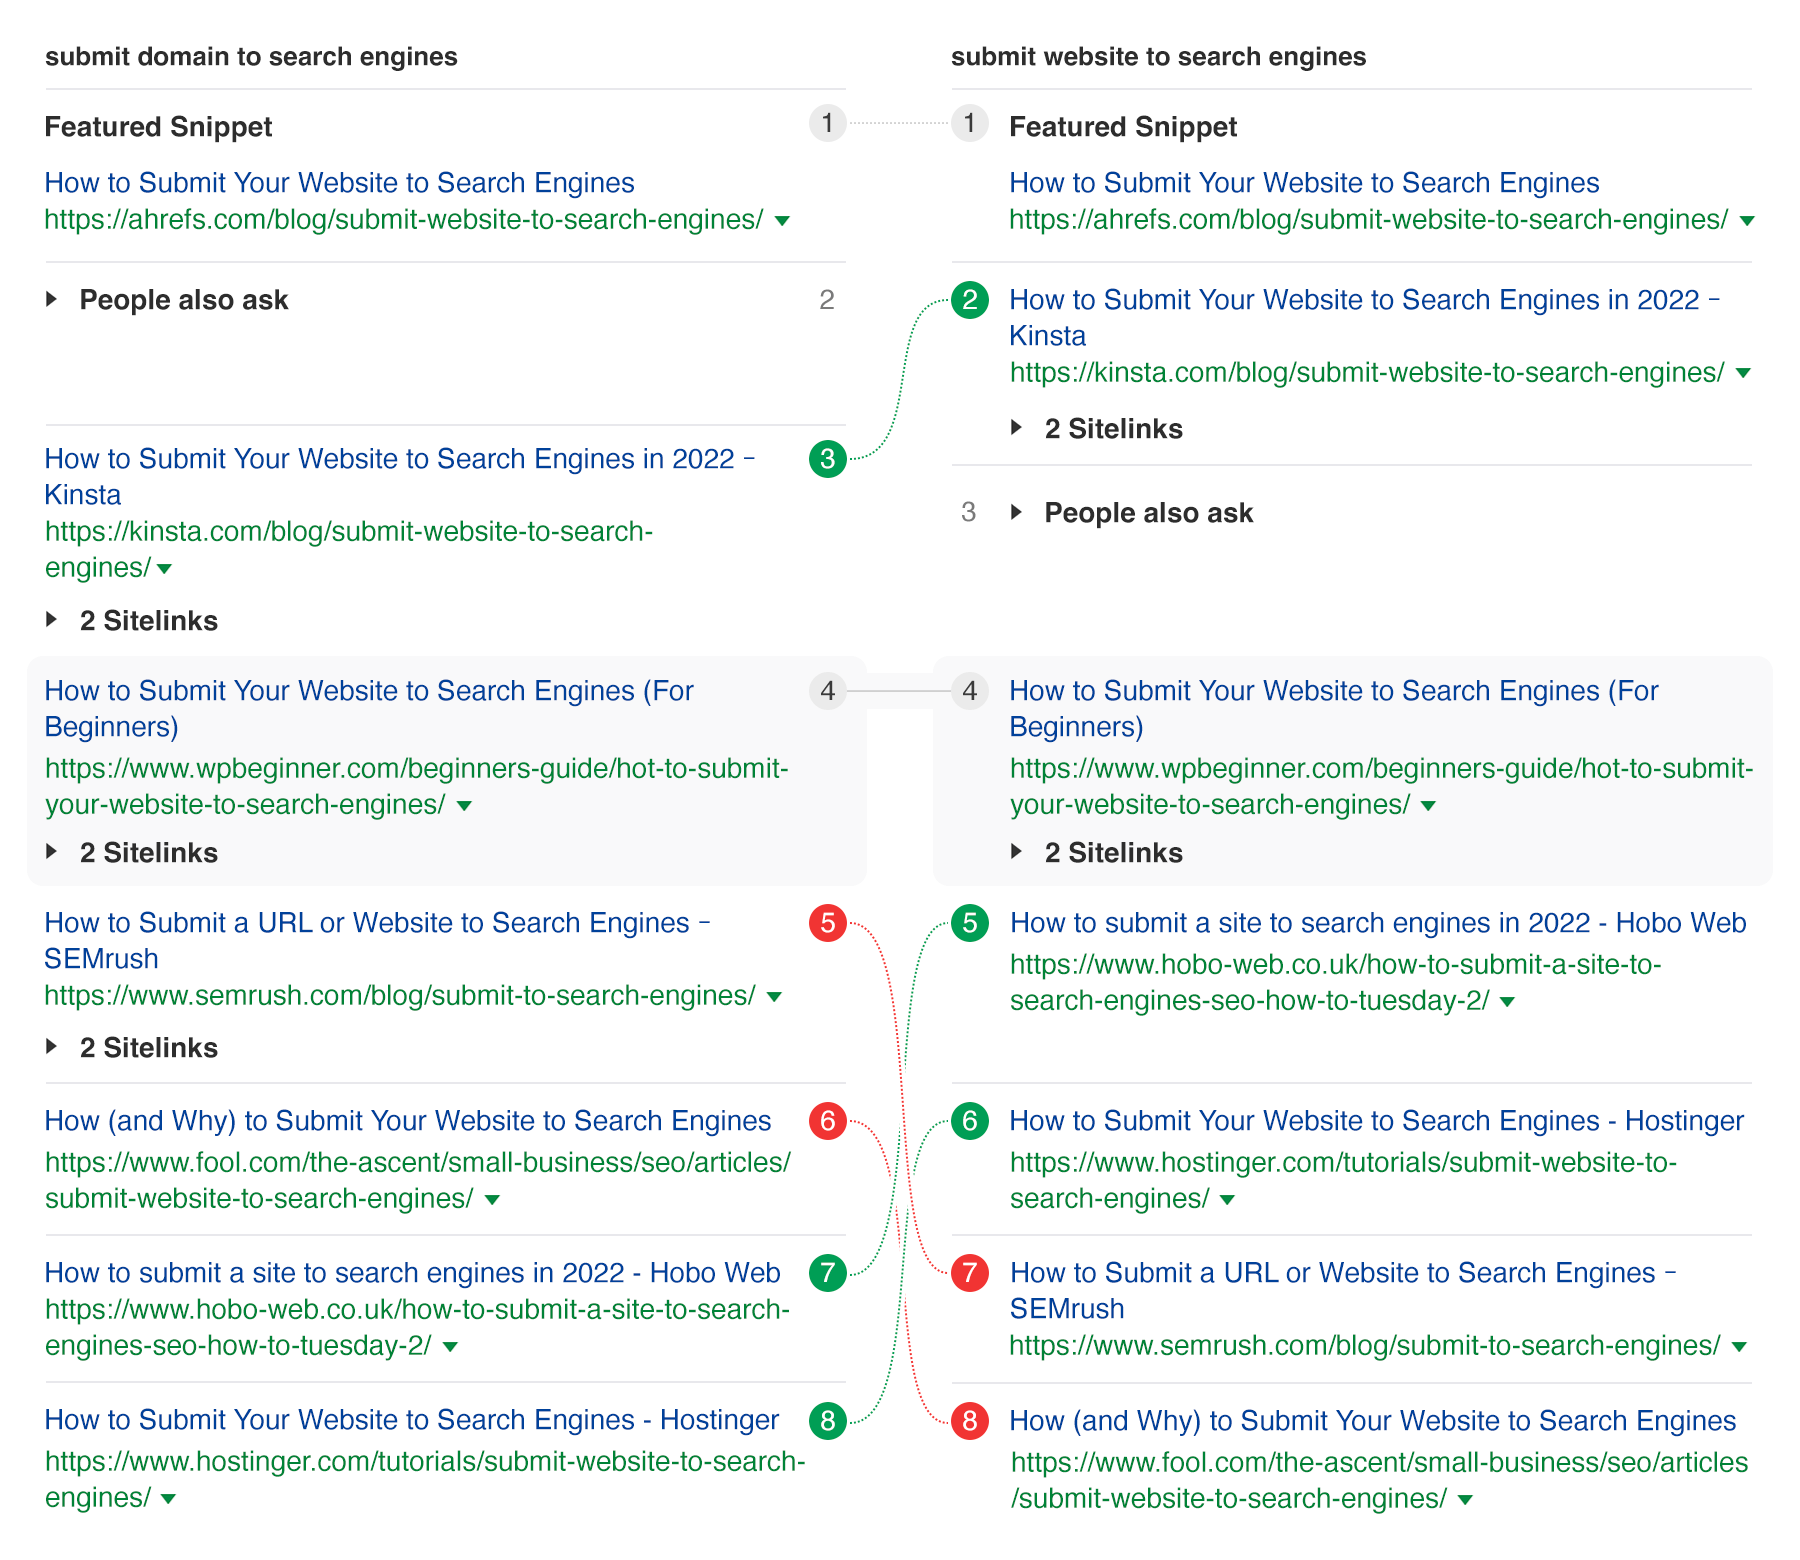 Most of the top-ranking pages for "submit domain to search engines" and "submit website to search engines" are the same